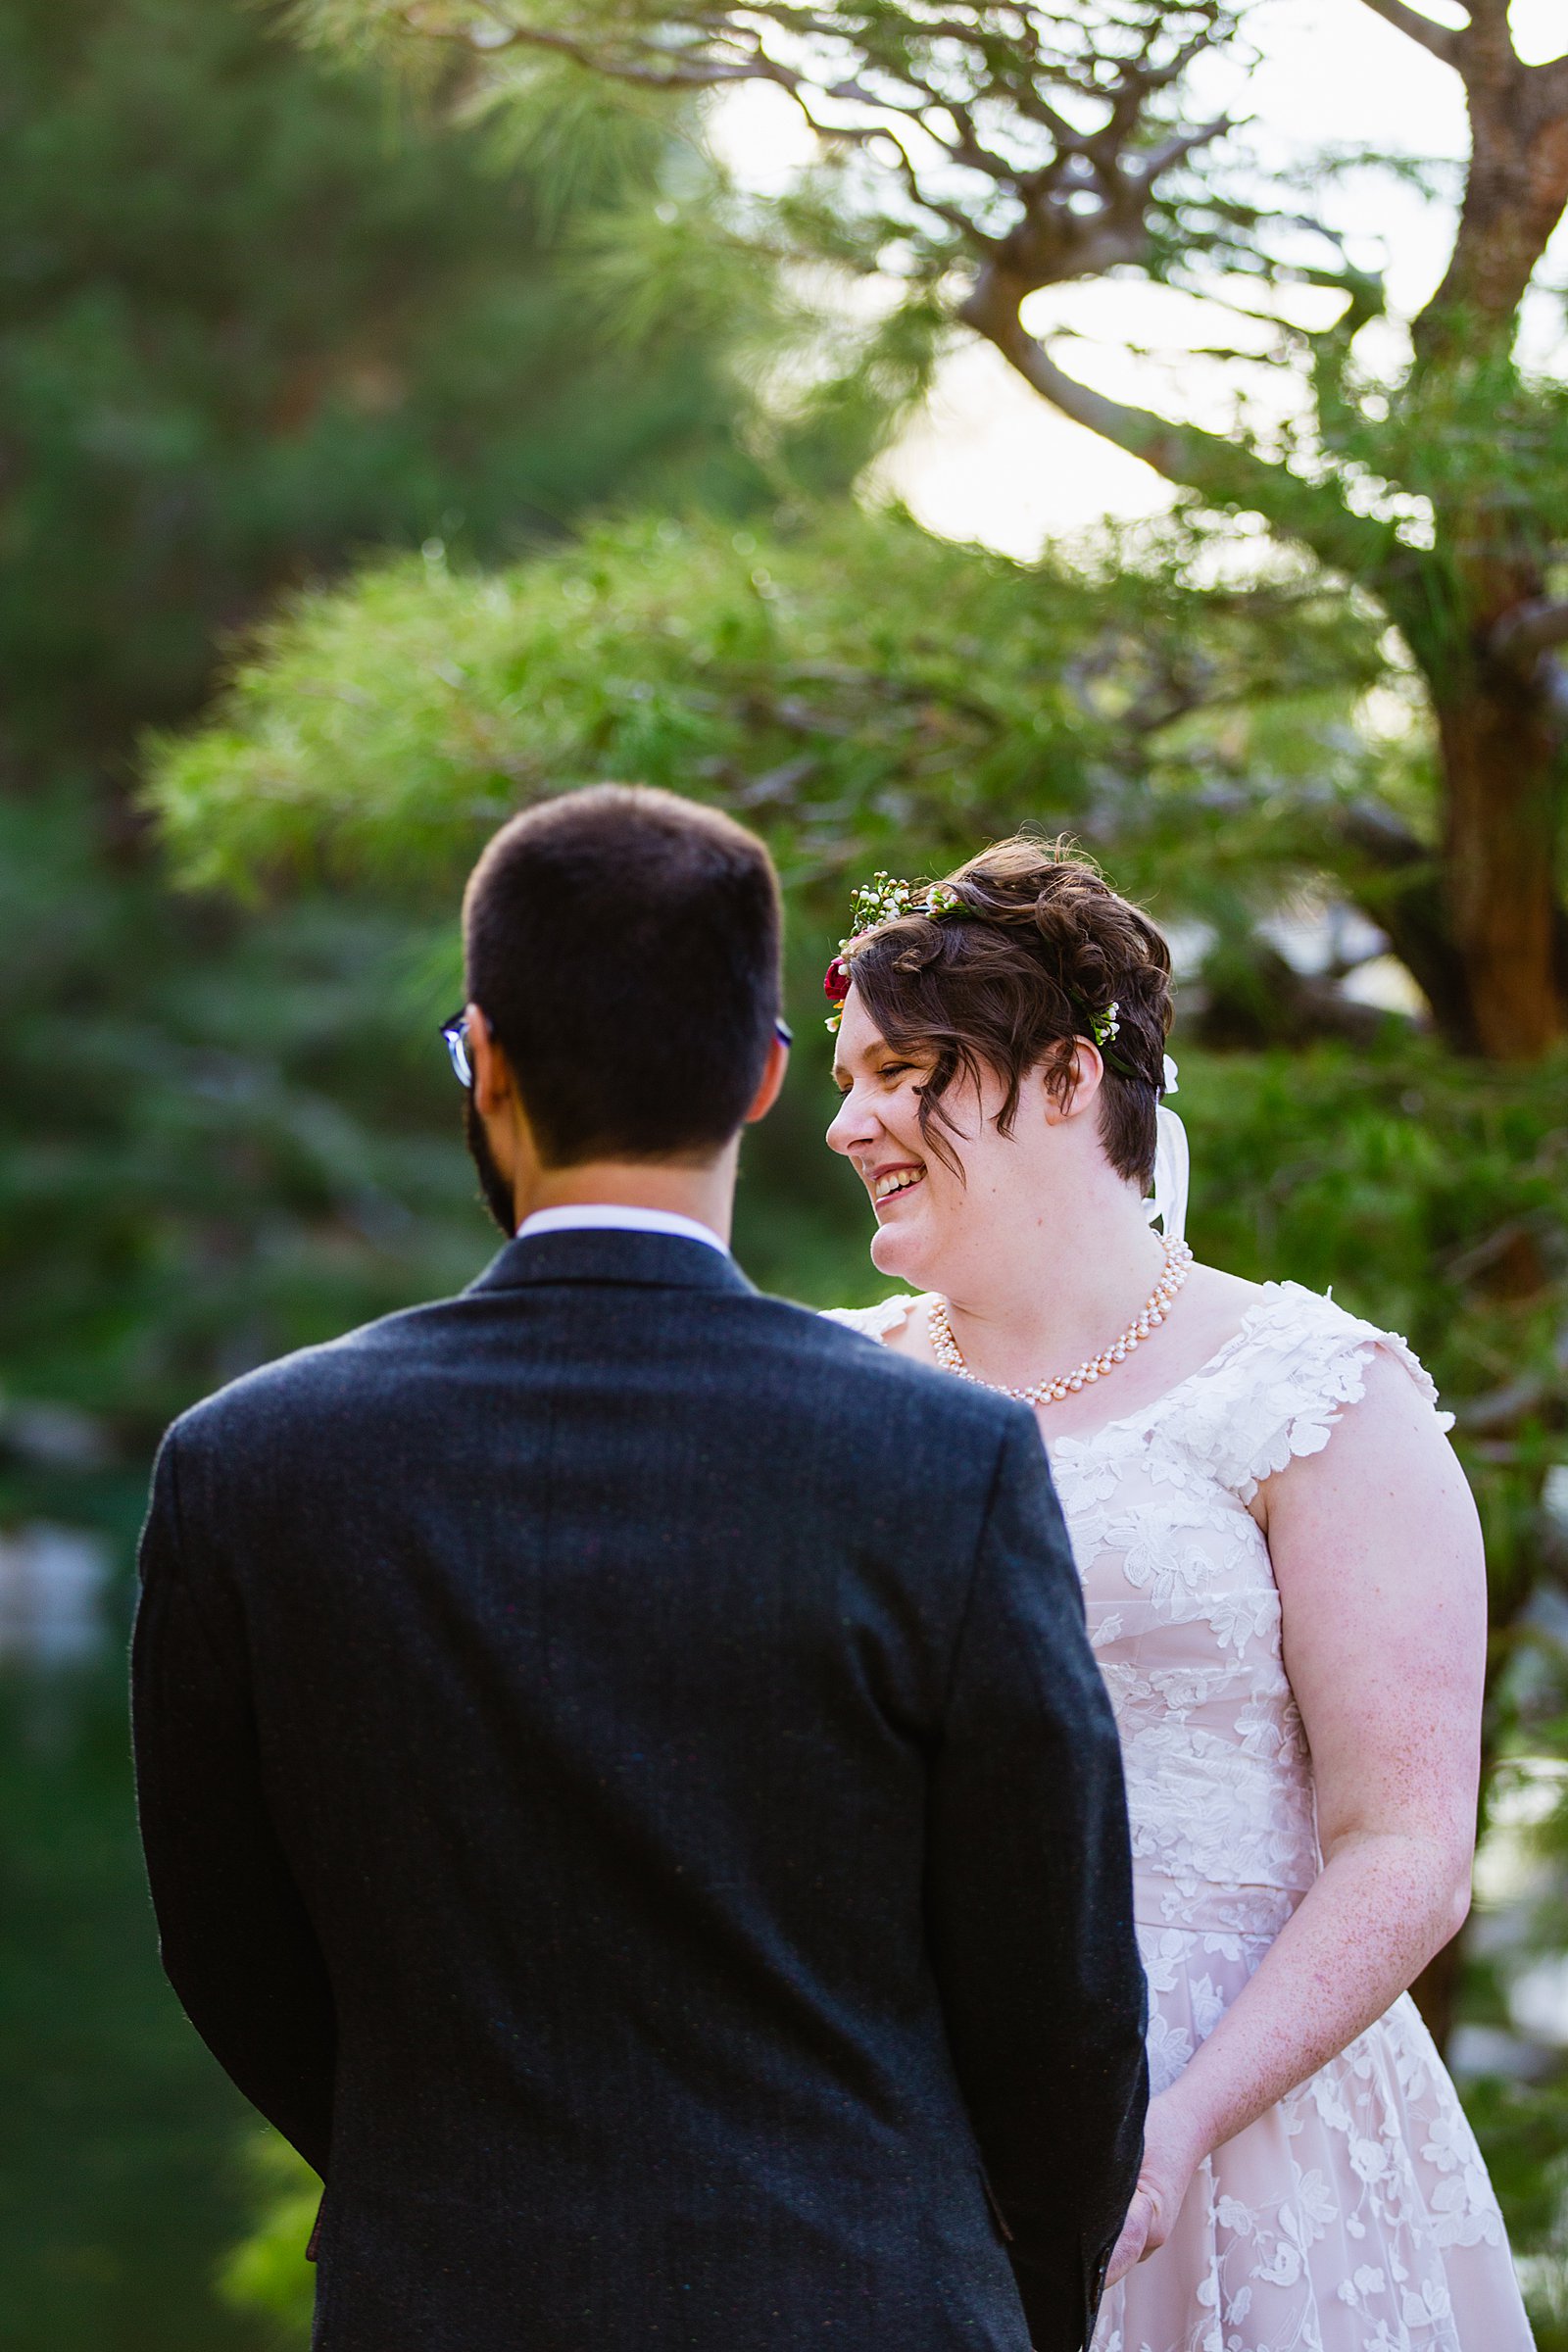 Bride laughing during her wedding ceremony at Japanese Friendship Garden by Phoenix wedding photographer PMA Photography.